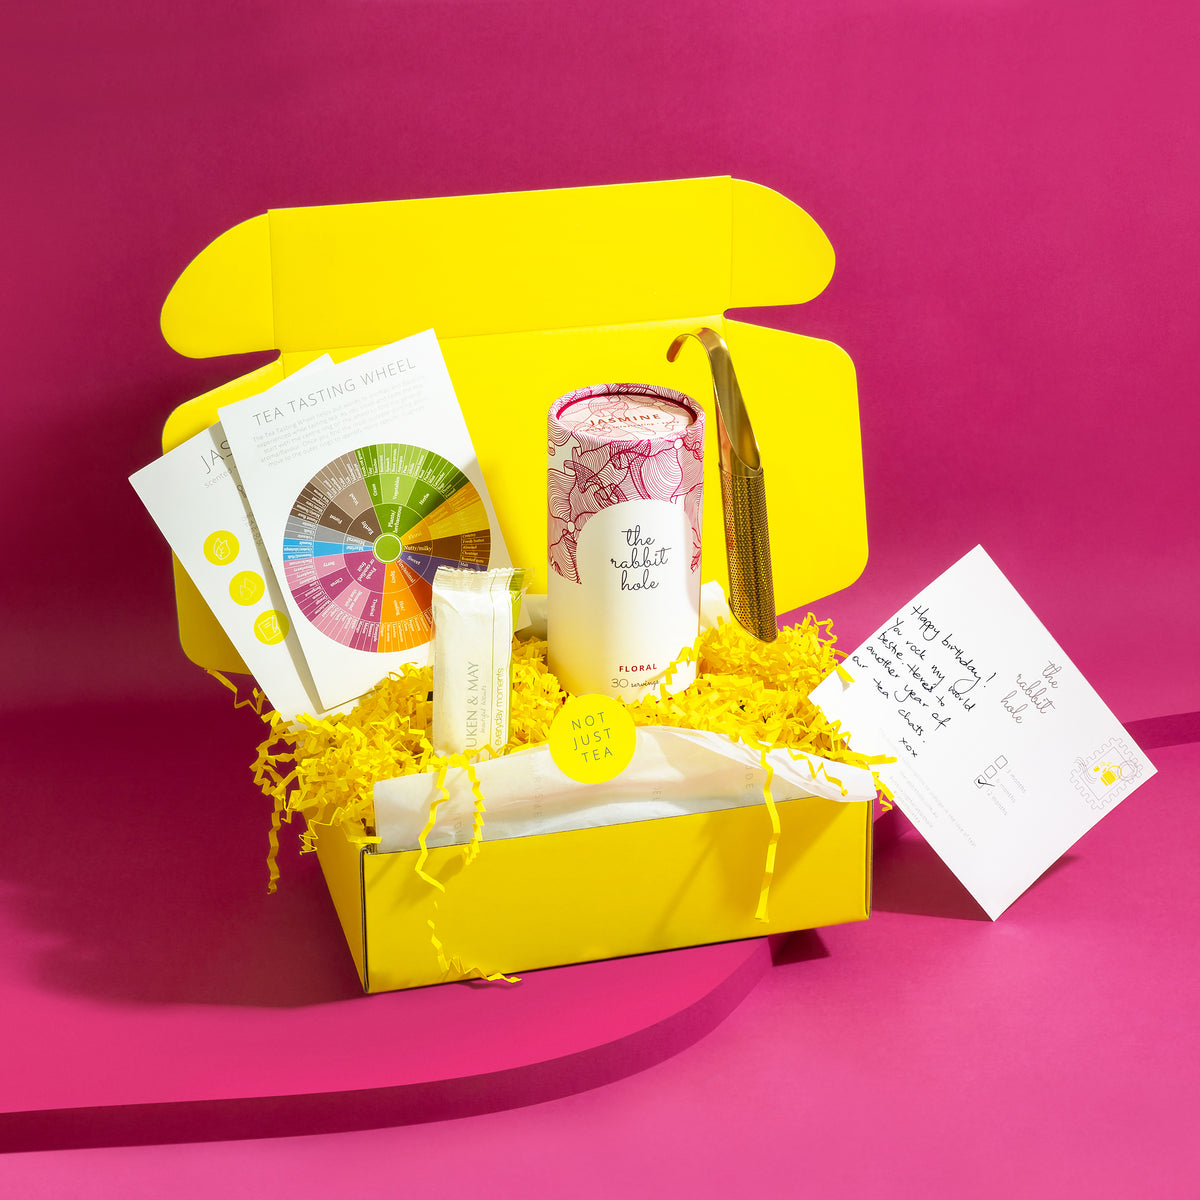 The Rabbit Hole open yellow gift box on bright pink background.